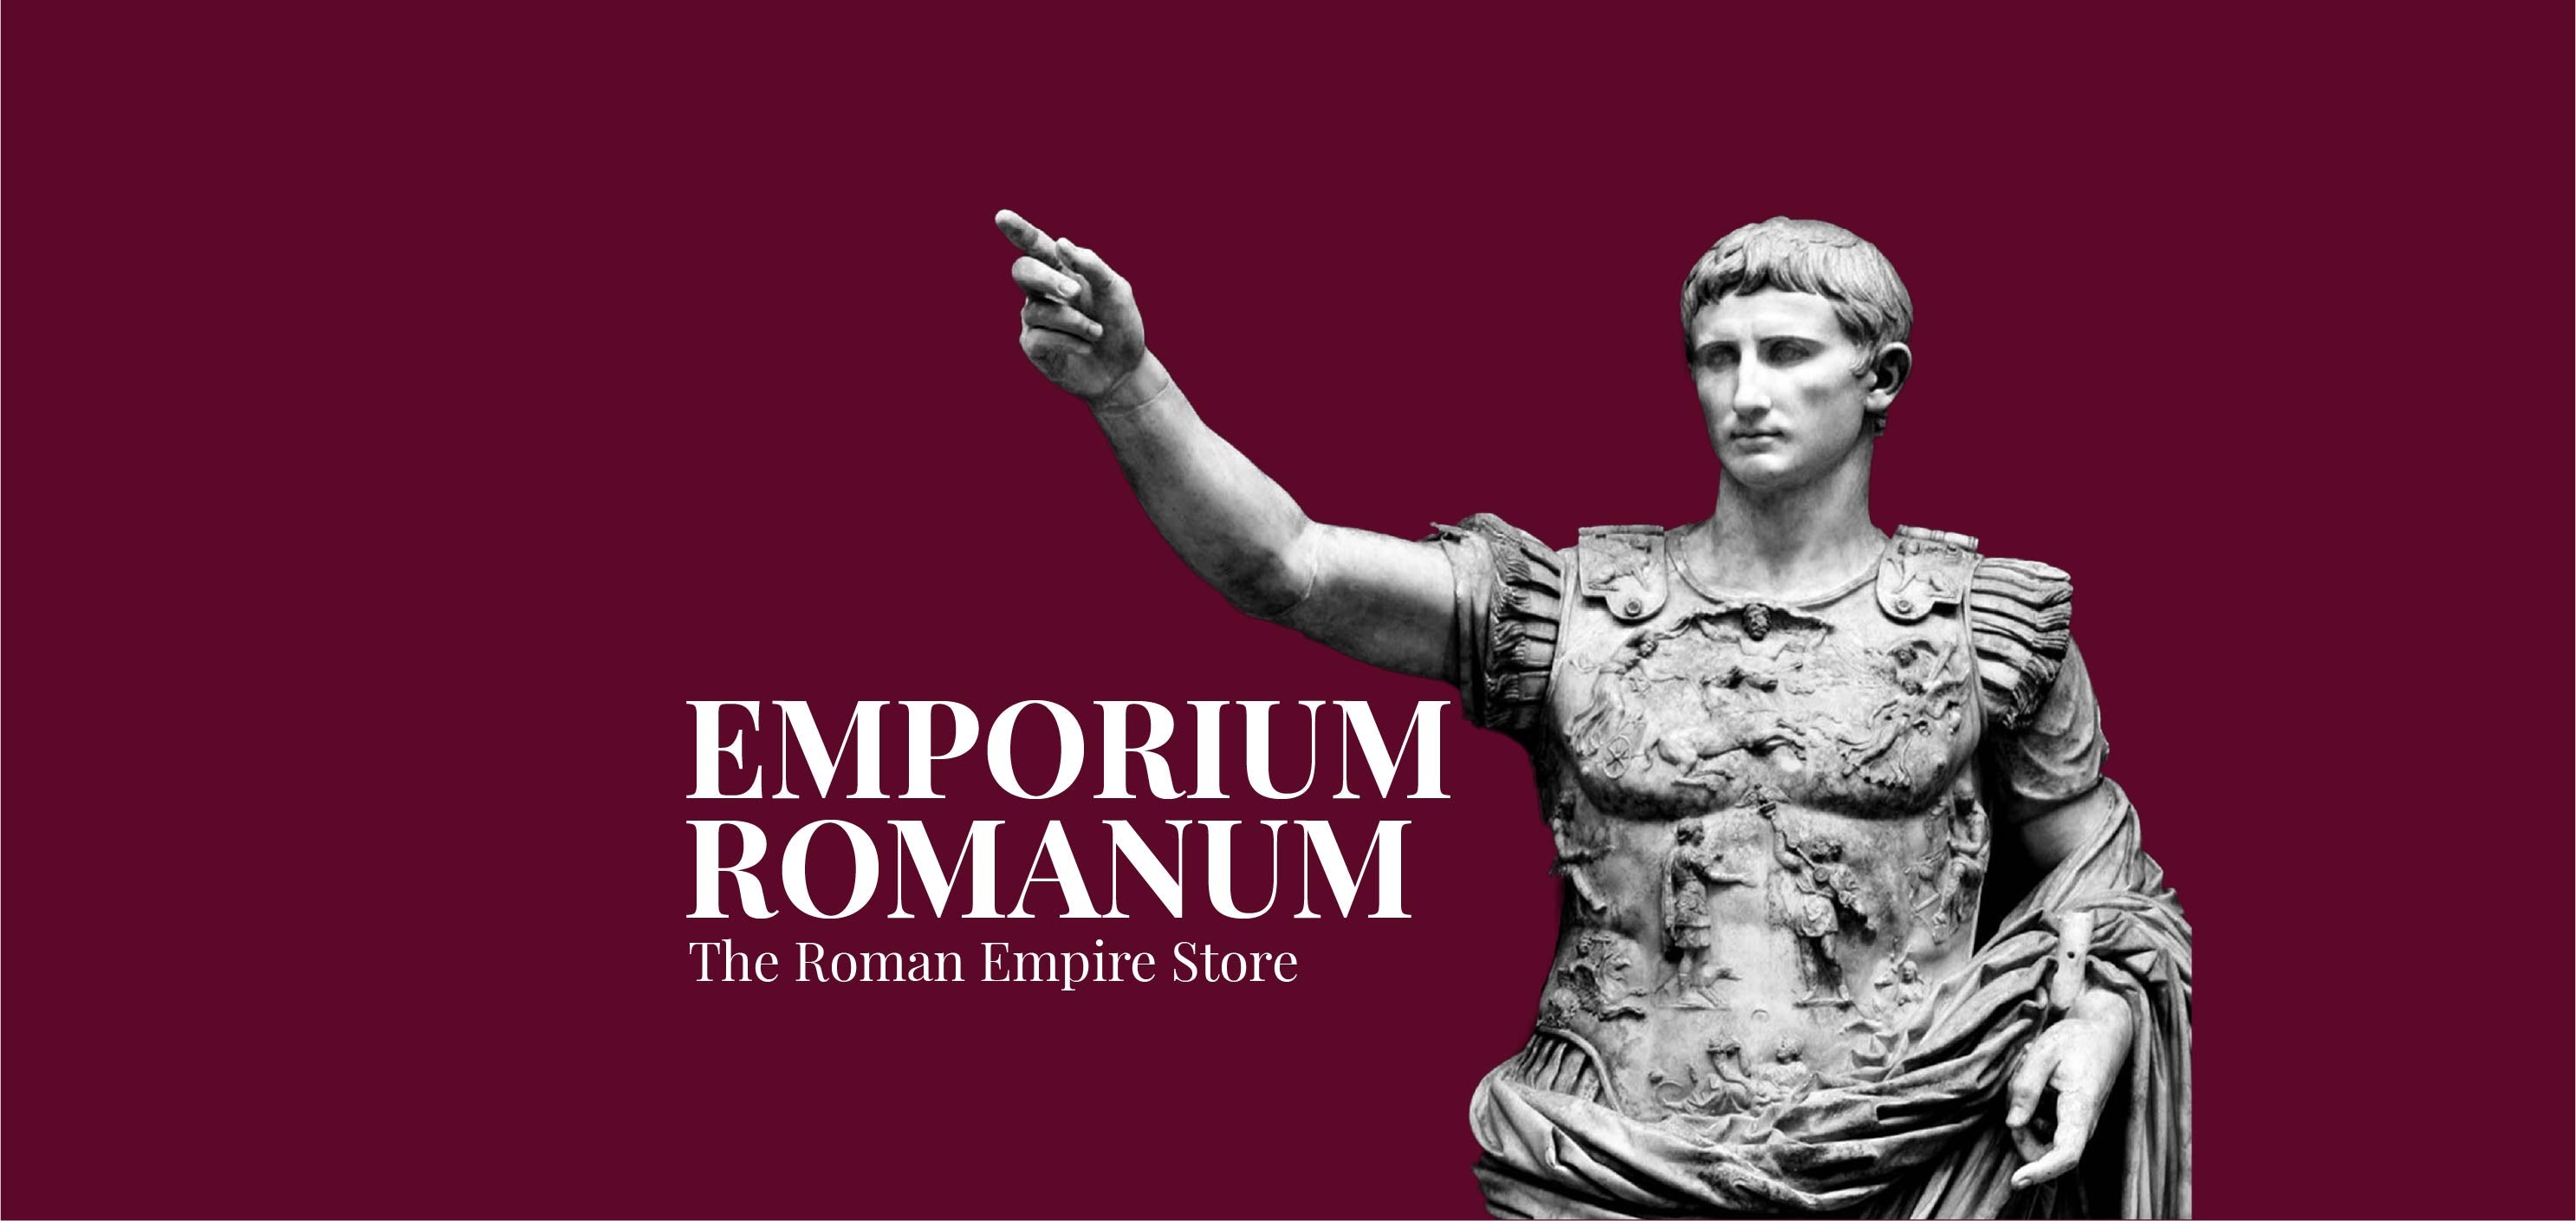 The Roman Emperor Augustus points to the air. It is a marble statue that represents the Greatness of the Roman Empire Store. A text shows "Emporium Romanum"